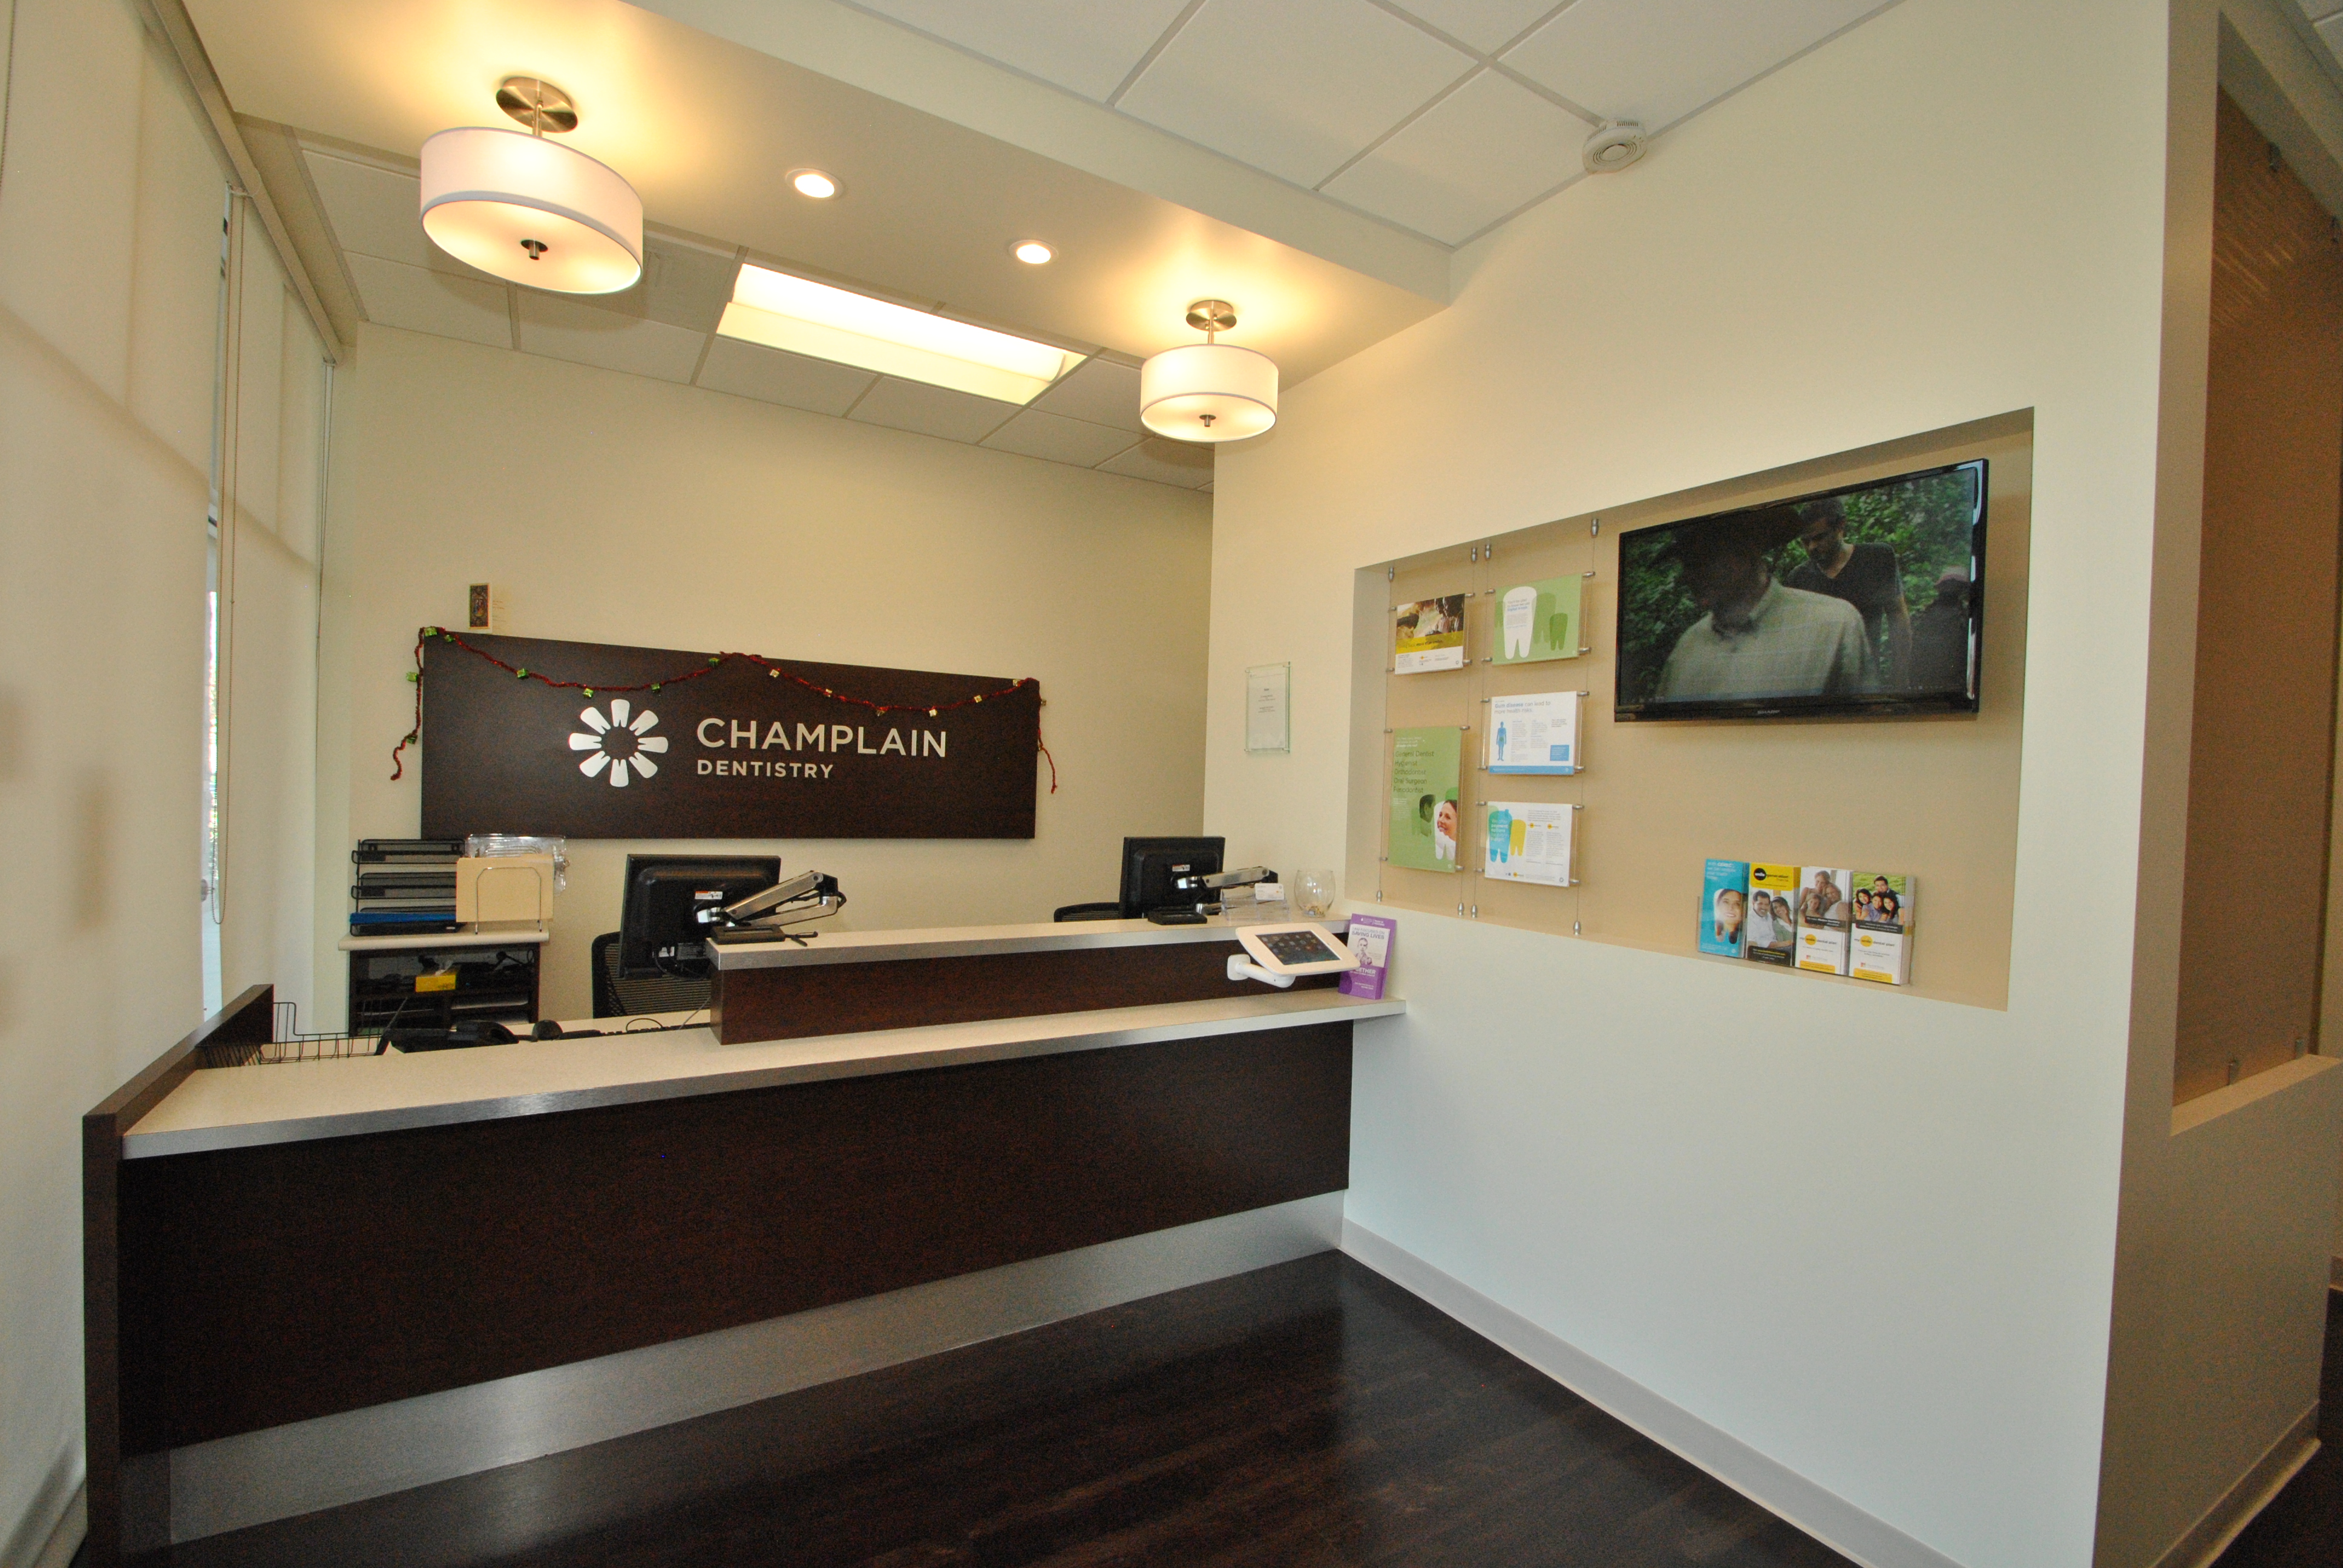 Champlain Dentistry opened its doors to the Fresno community in December 2014.